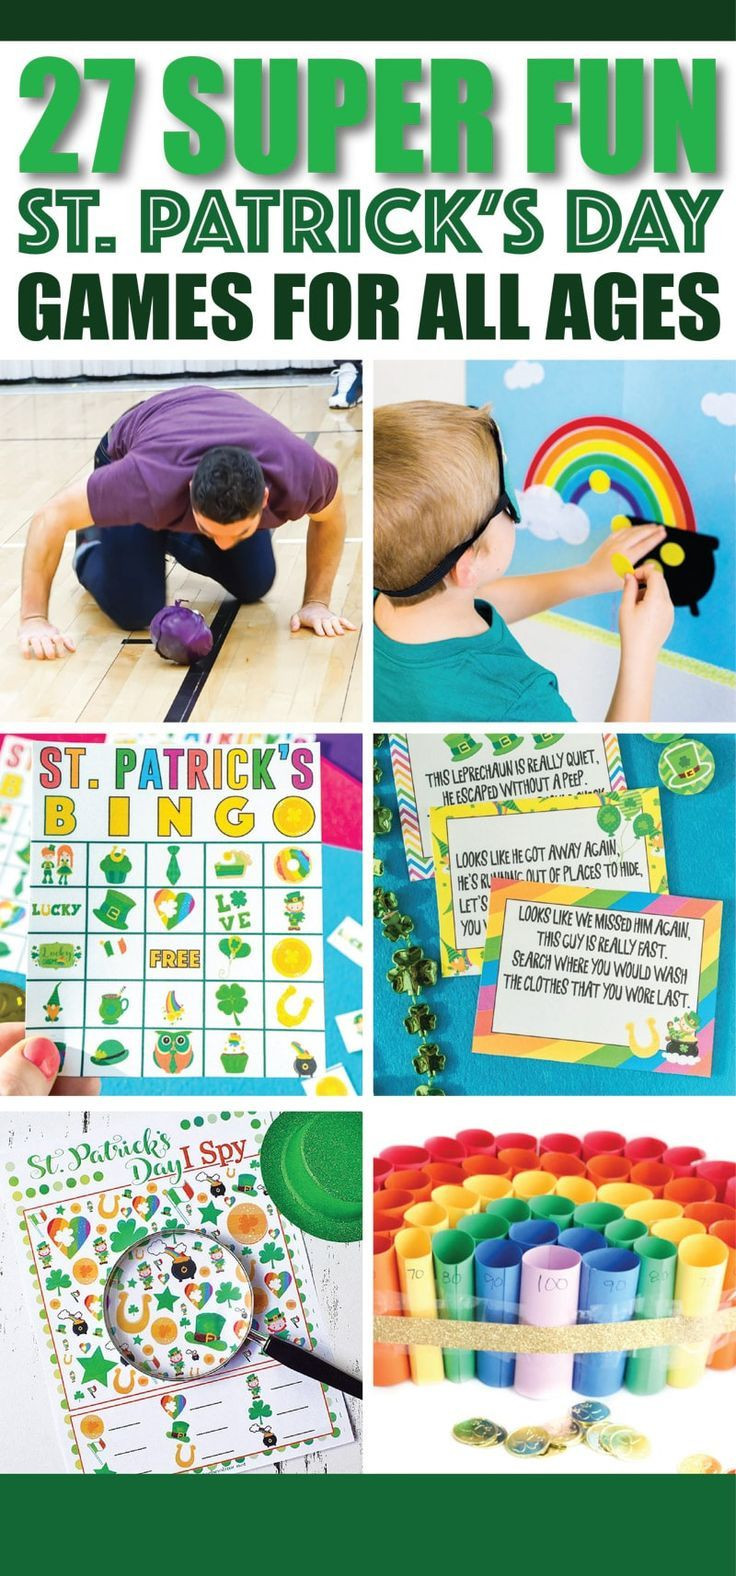 St Patrick Day Party Ideas For Adults
 23 Super Fun St Patrick s Day Activities for Families